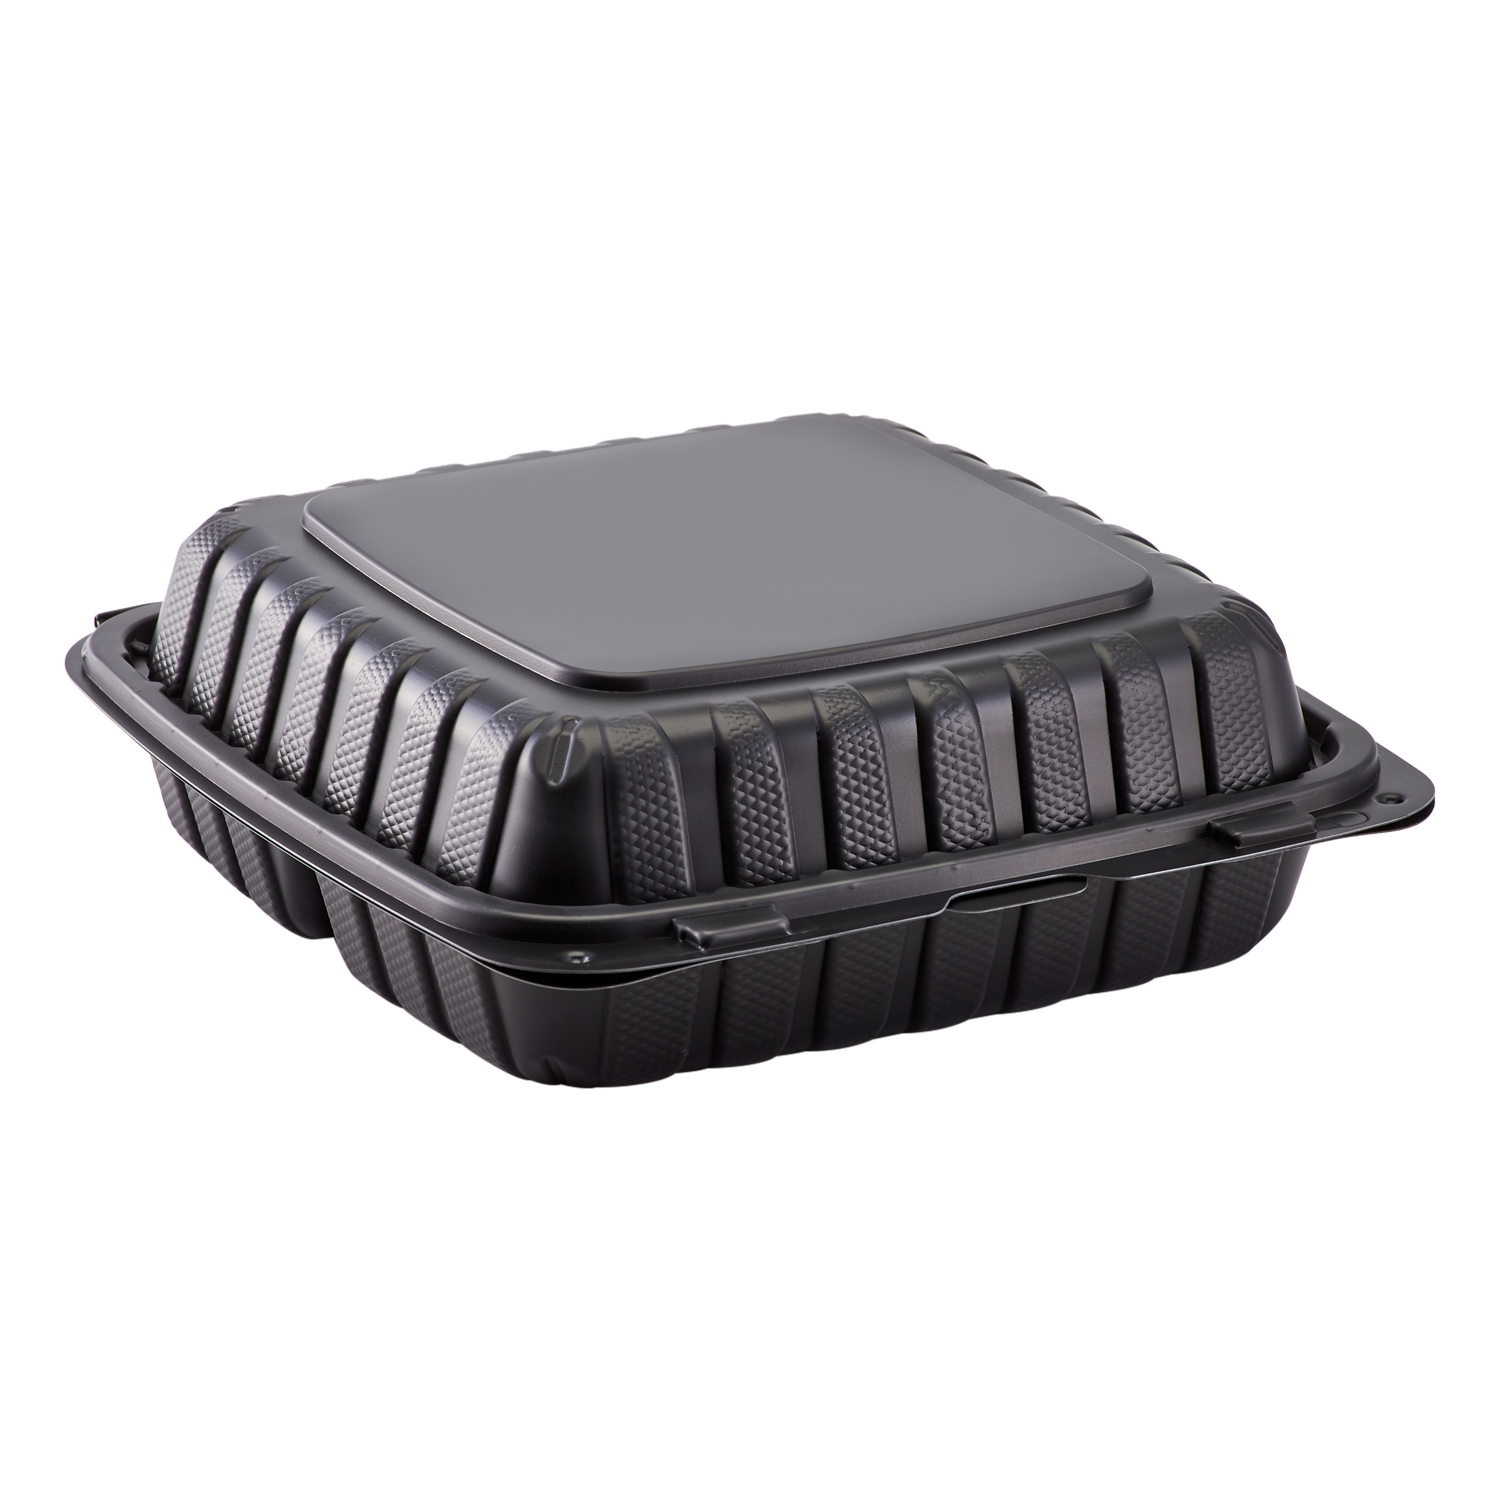 Hefty Food Service Containers Rectangle 9 3/4 x 5 x 3 1/4 (125 ct.) –  Openbax